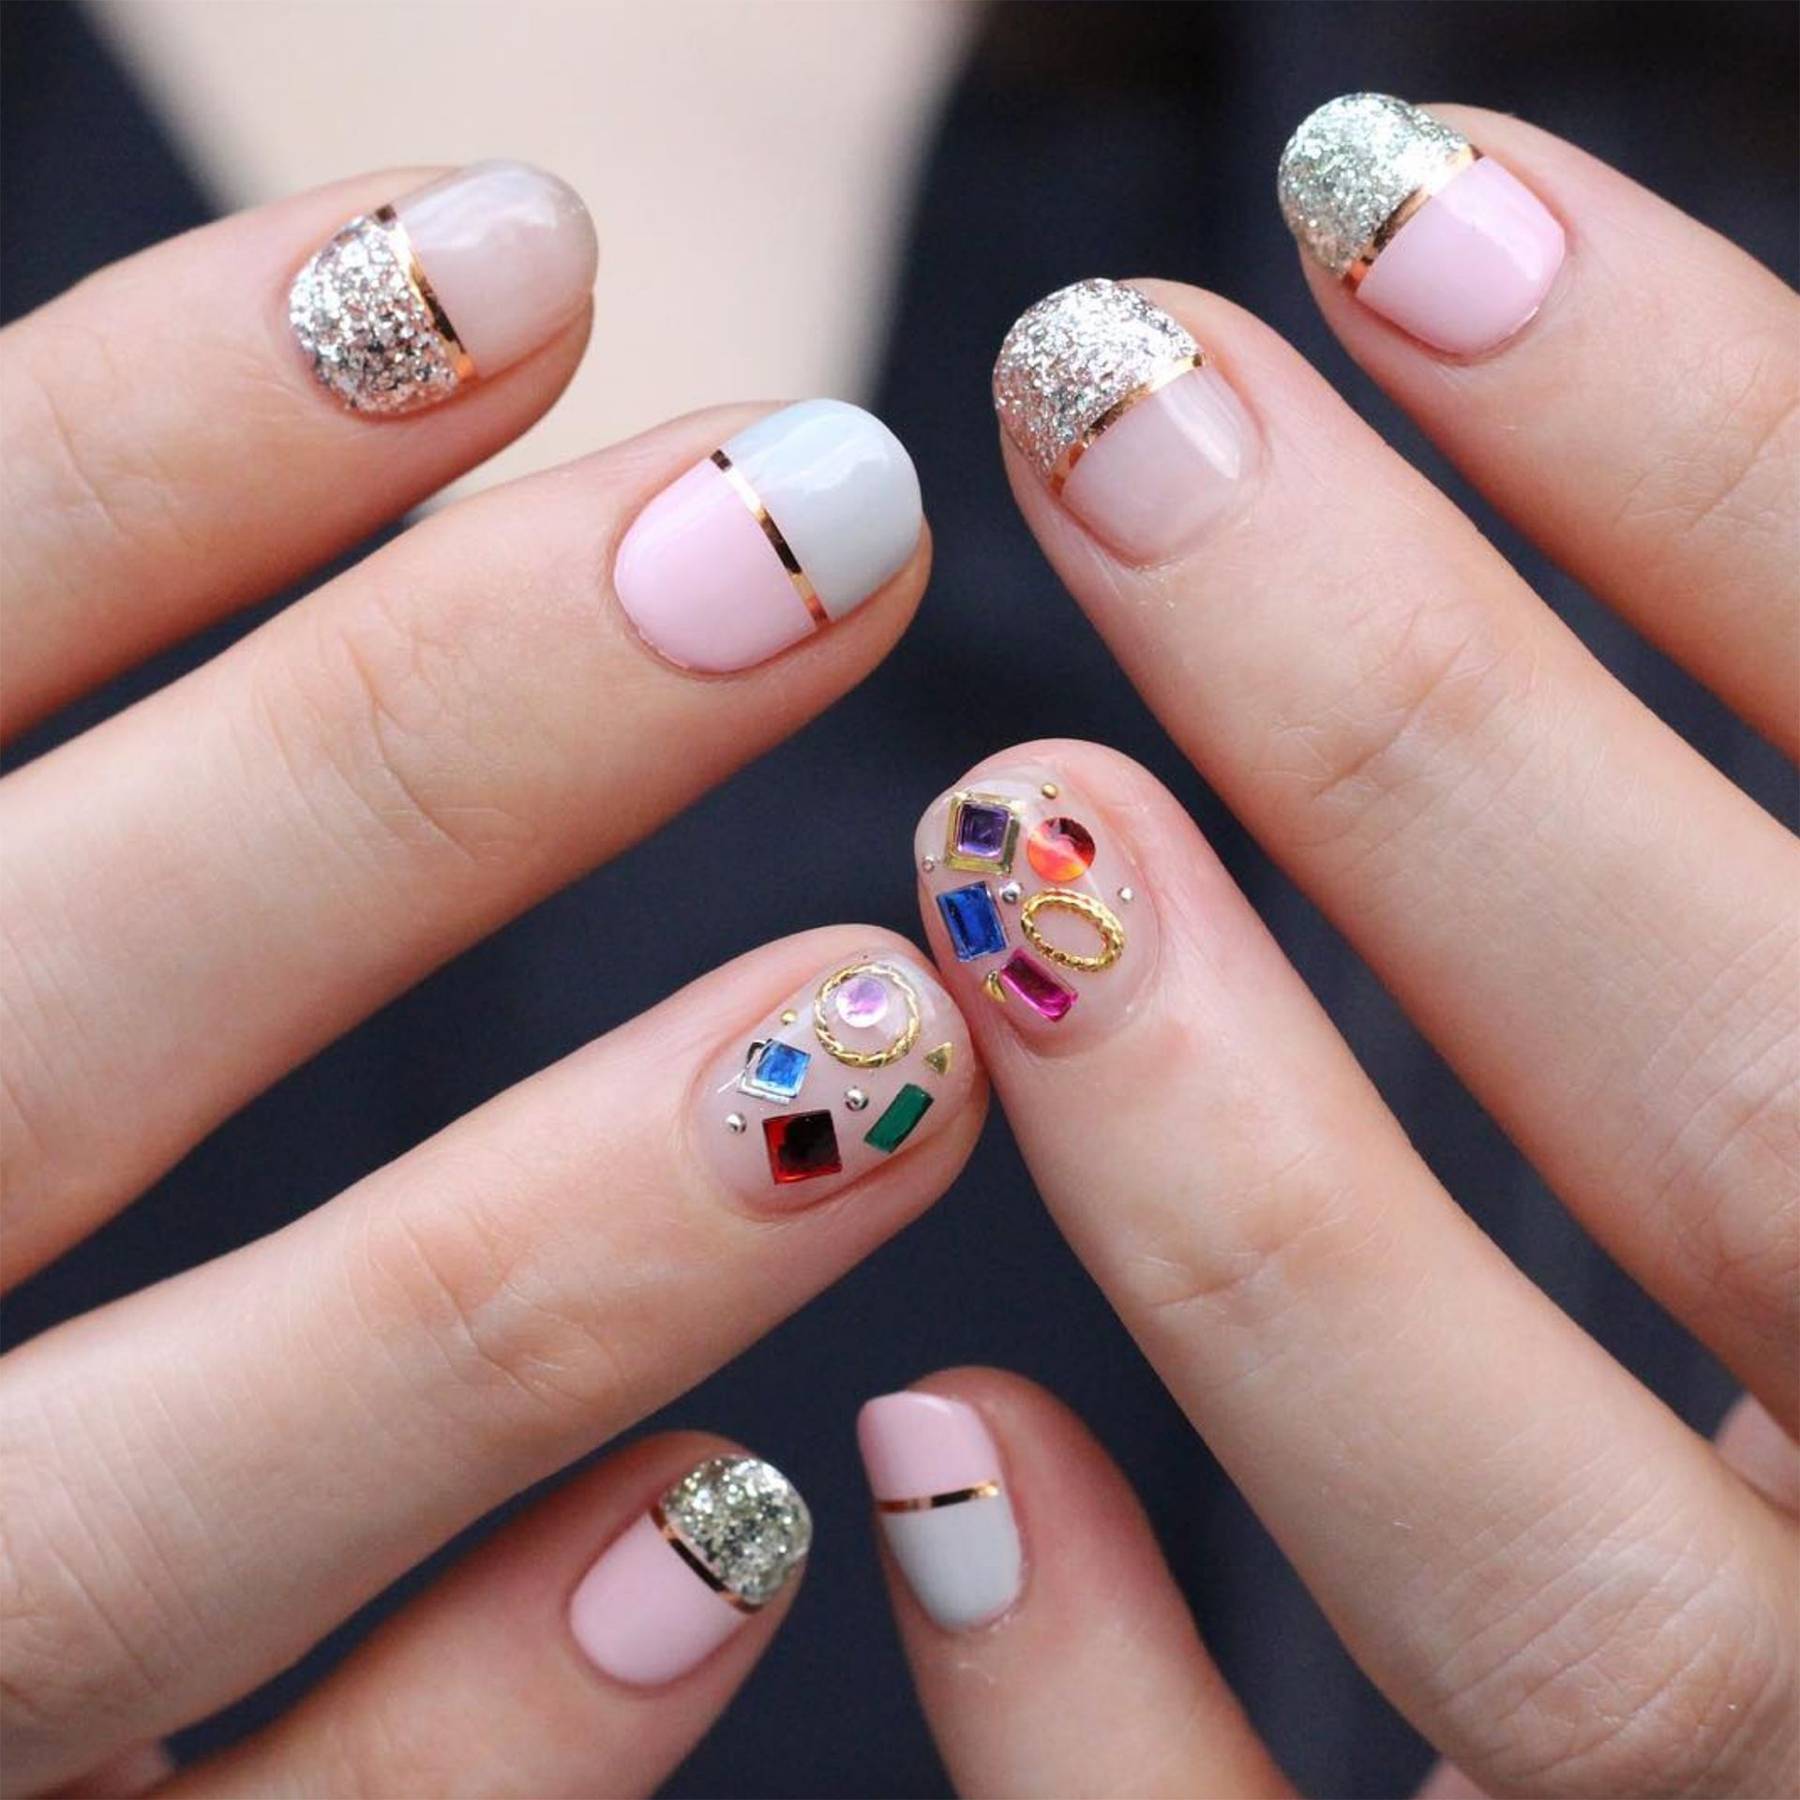 Korean Nail Art - Nail Designs & Pictures from Instagram | Glamour UK